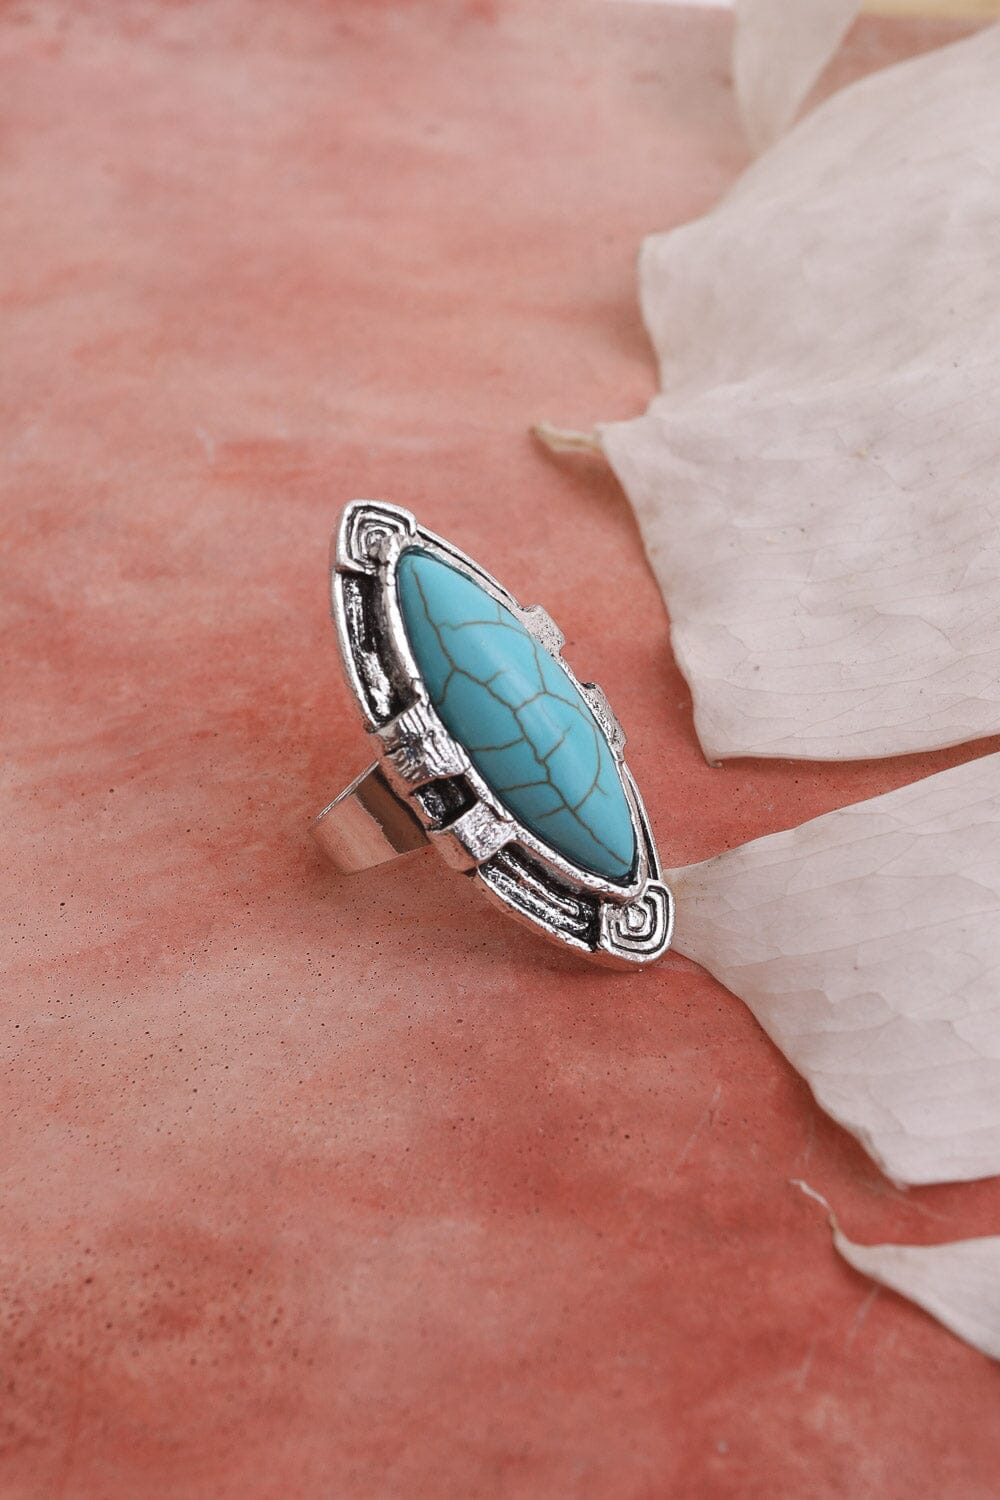 Turquoise Marquise Cut Silver Ring Jewelry Leto Collection 